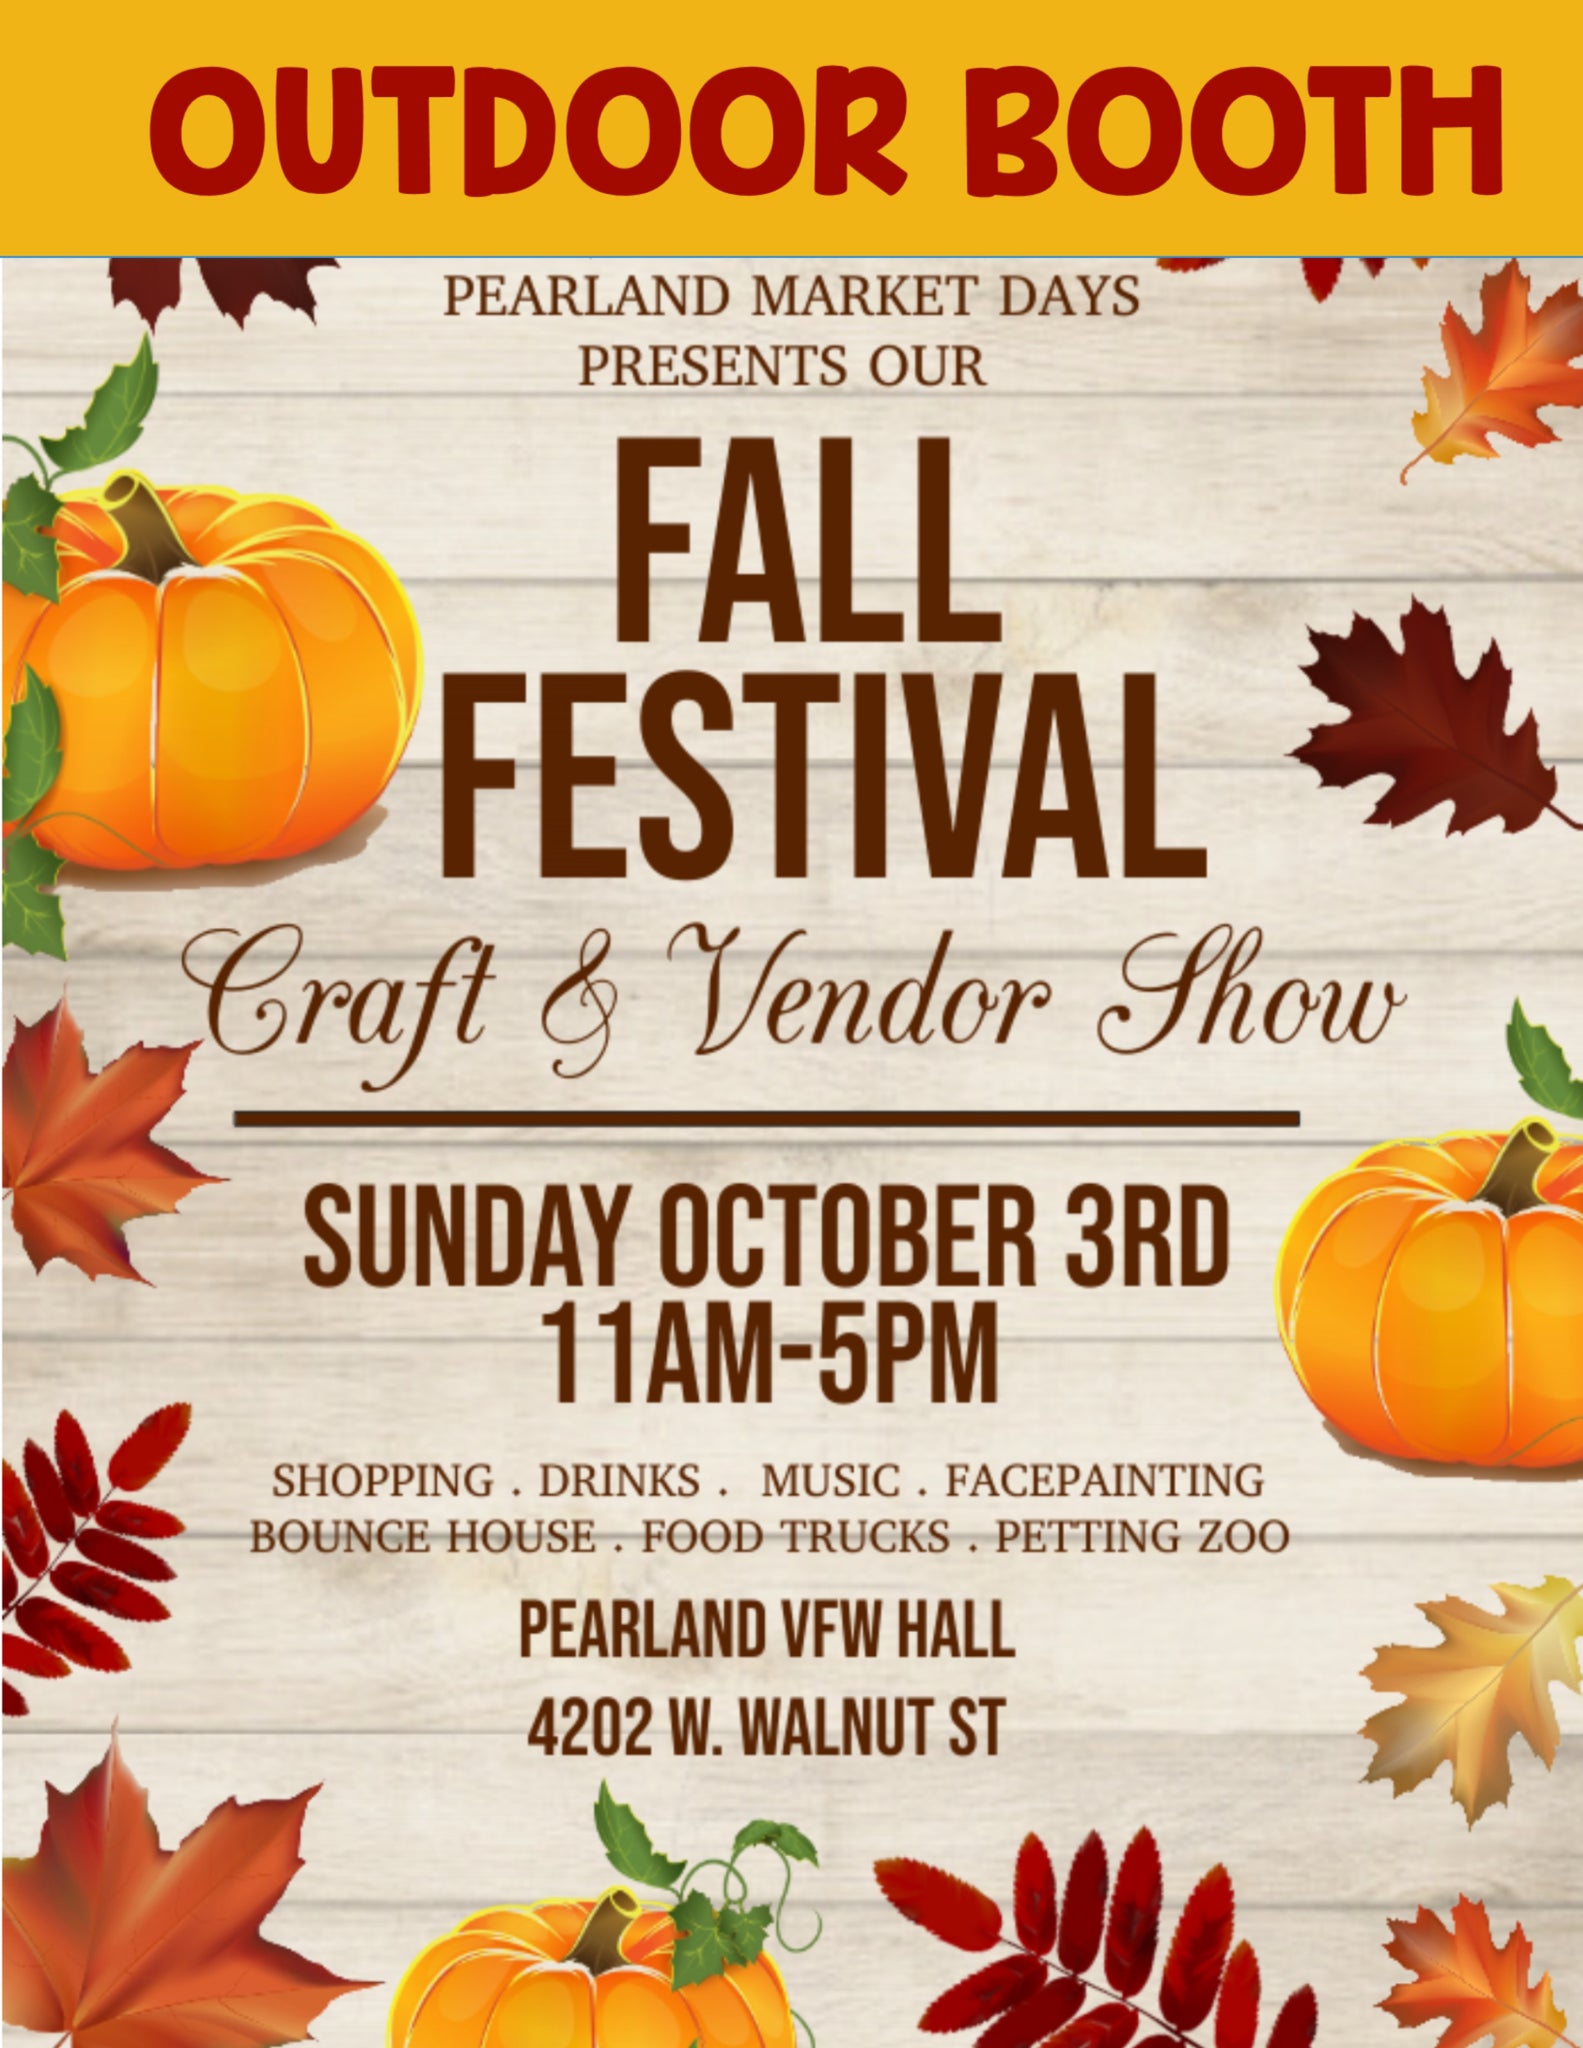 PEARLAND Sunday October 3rd, 2021- OUTDOOR BOOTH